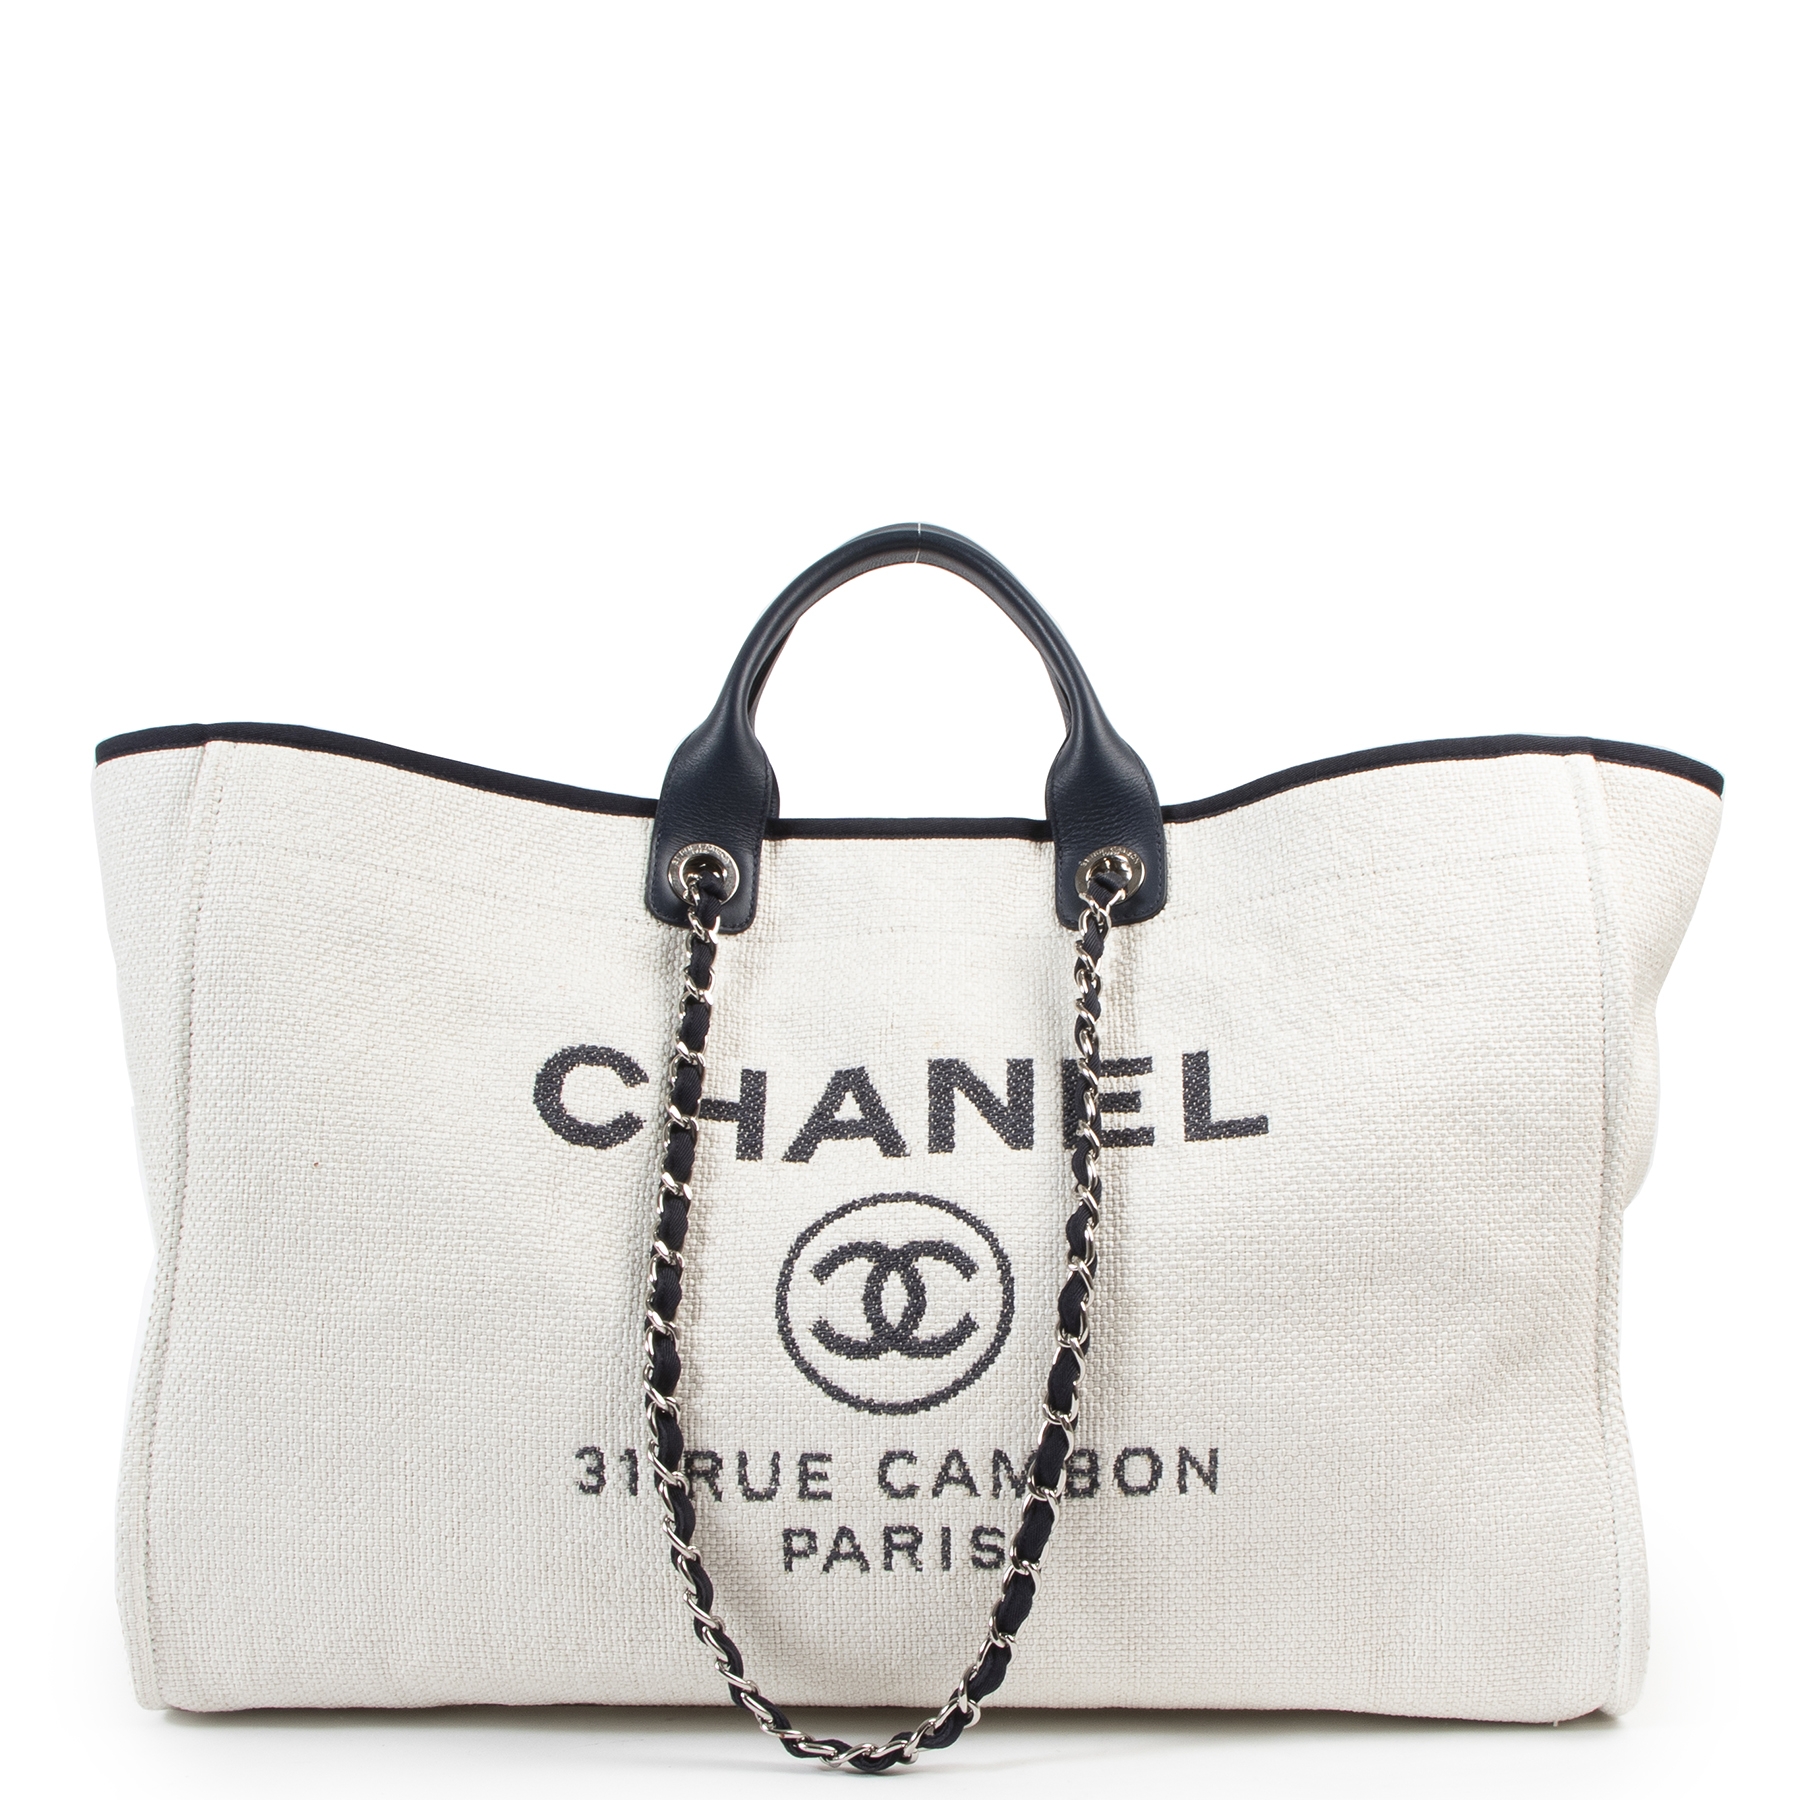 Chanel Cotton Tote Bags for Women